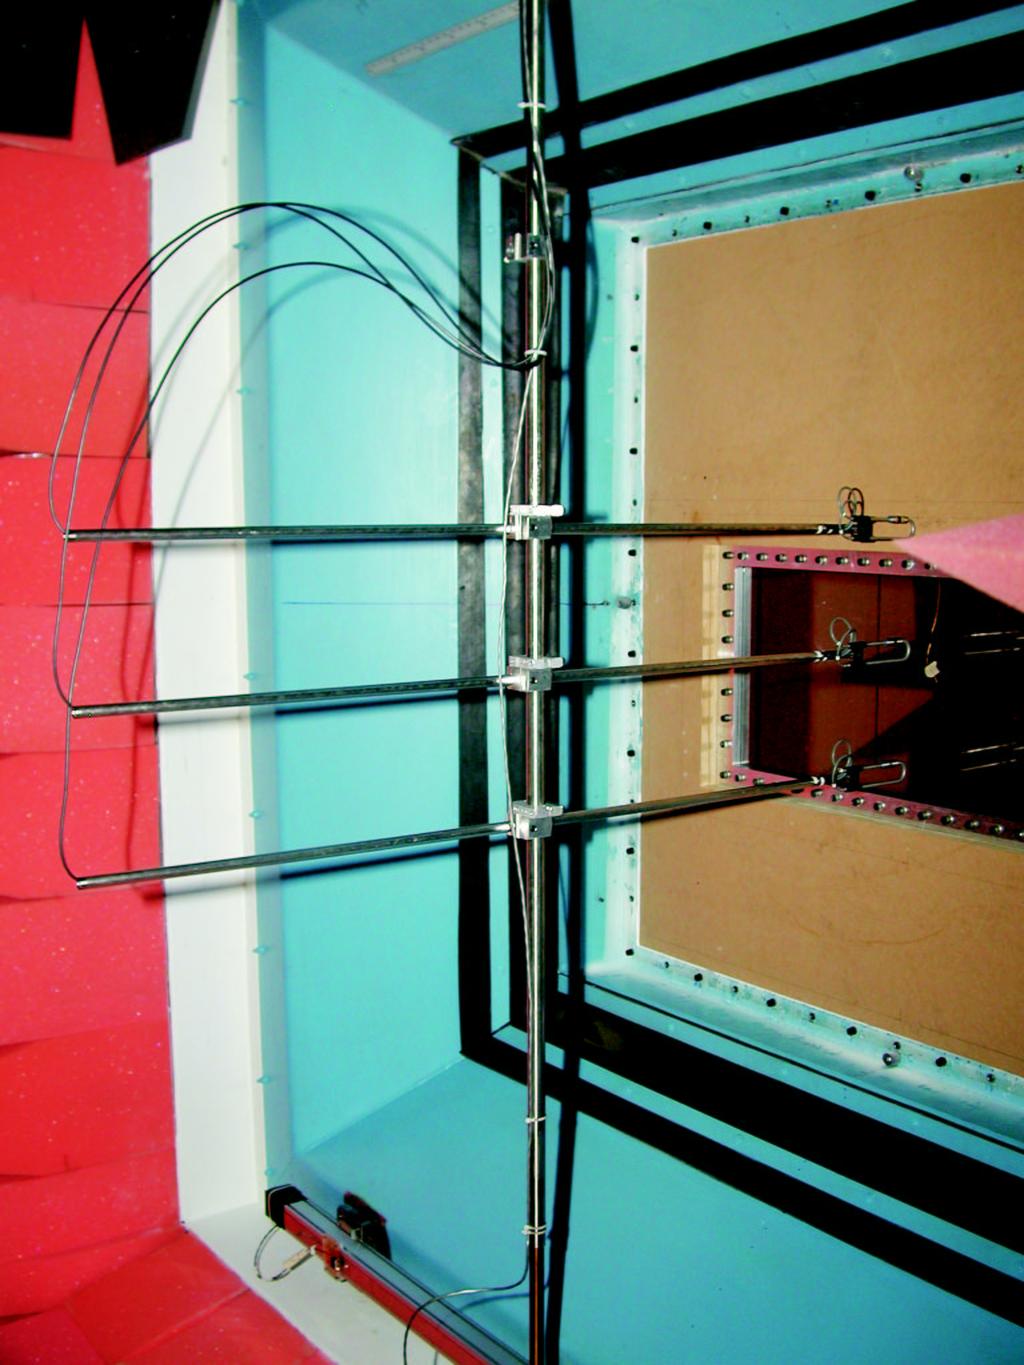 x 4 (1.41 m). A plexiglas test panel is shown installed in the SALT Facility in Figure 2. The plexiglas panels are clamped between two.